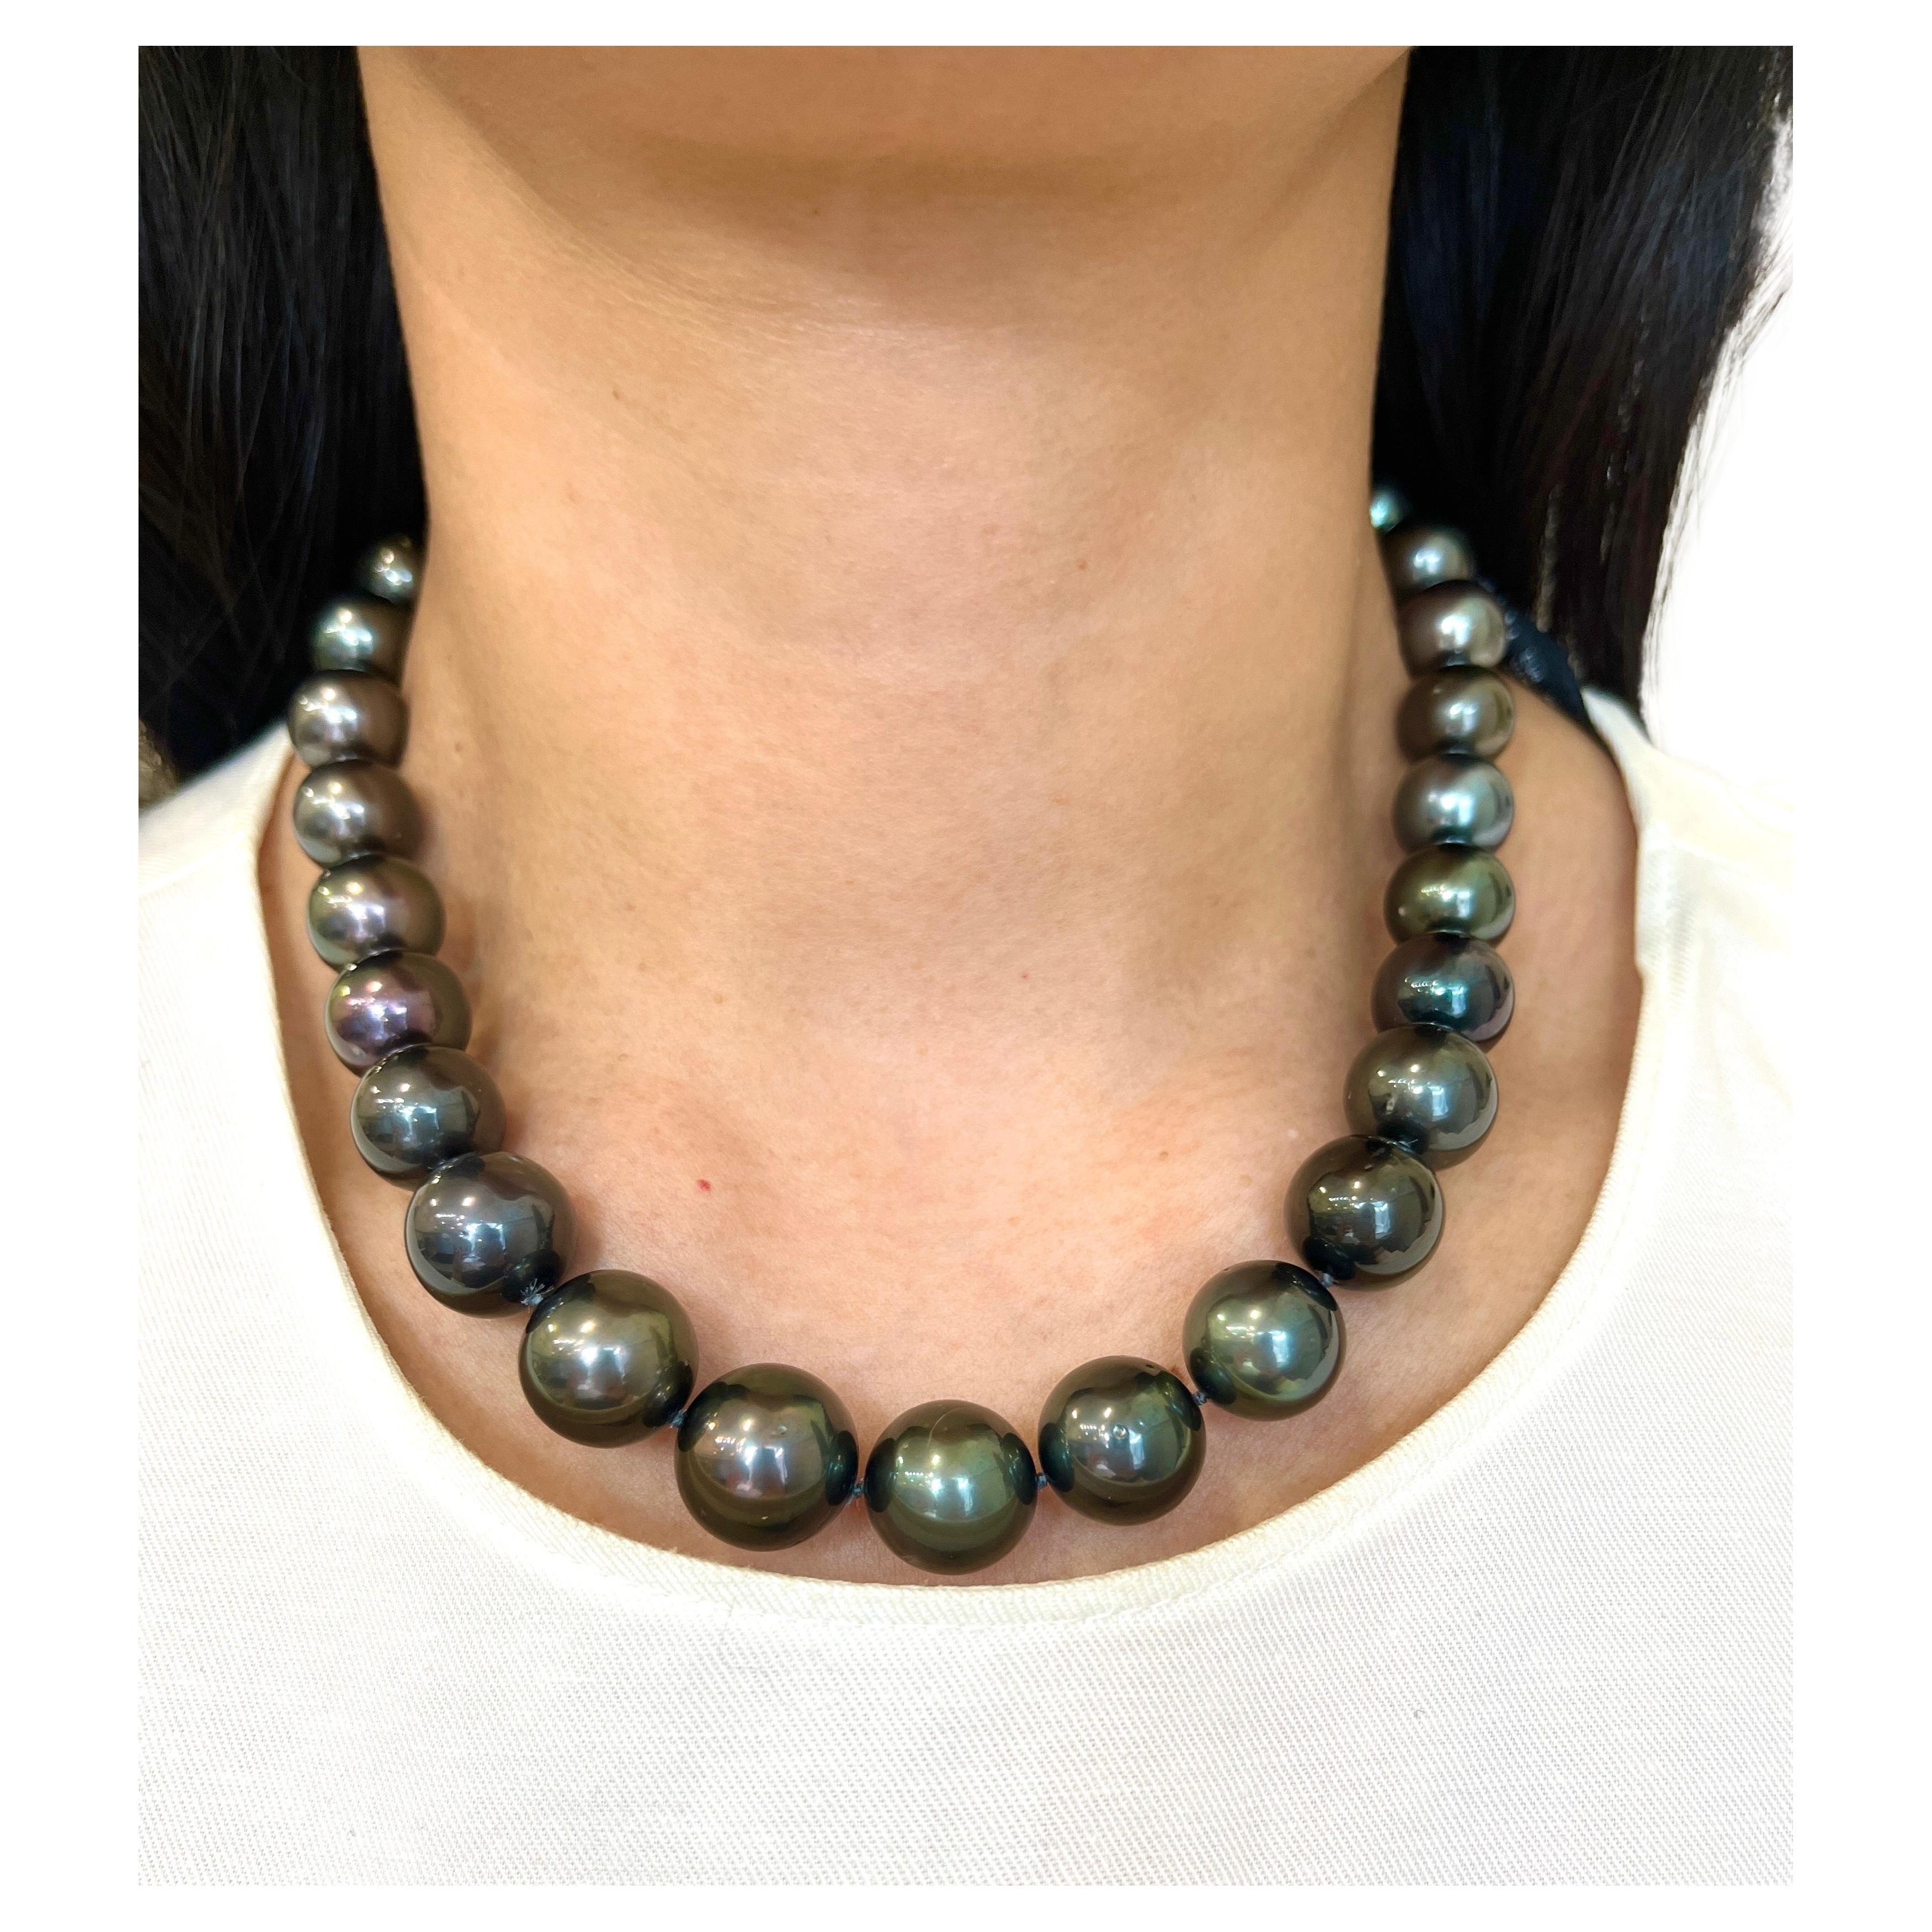 2.25 ct Diamond Clasp & Natural Black Tahitian Pearl Necklace For Sale